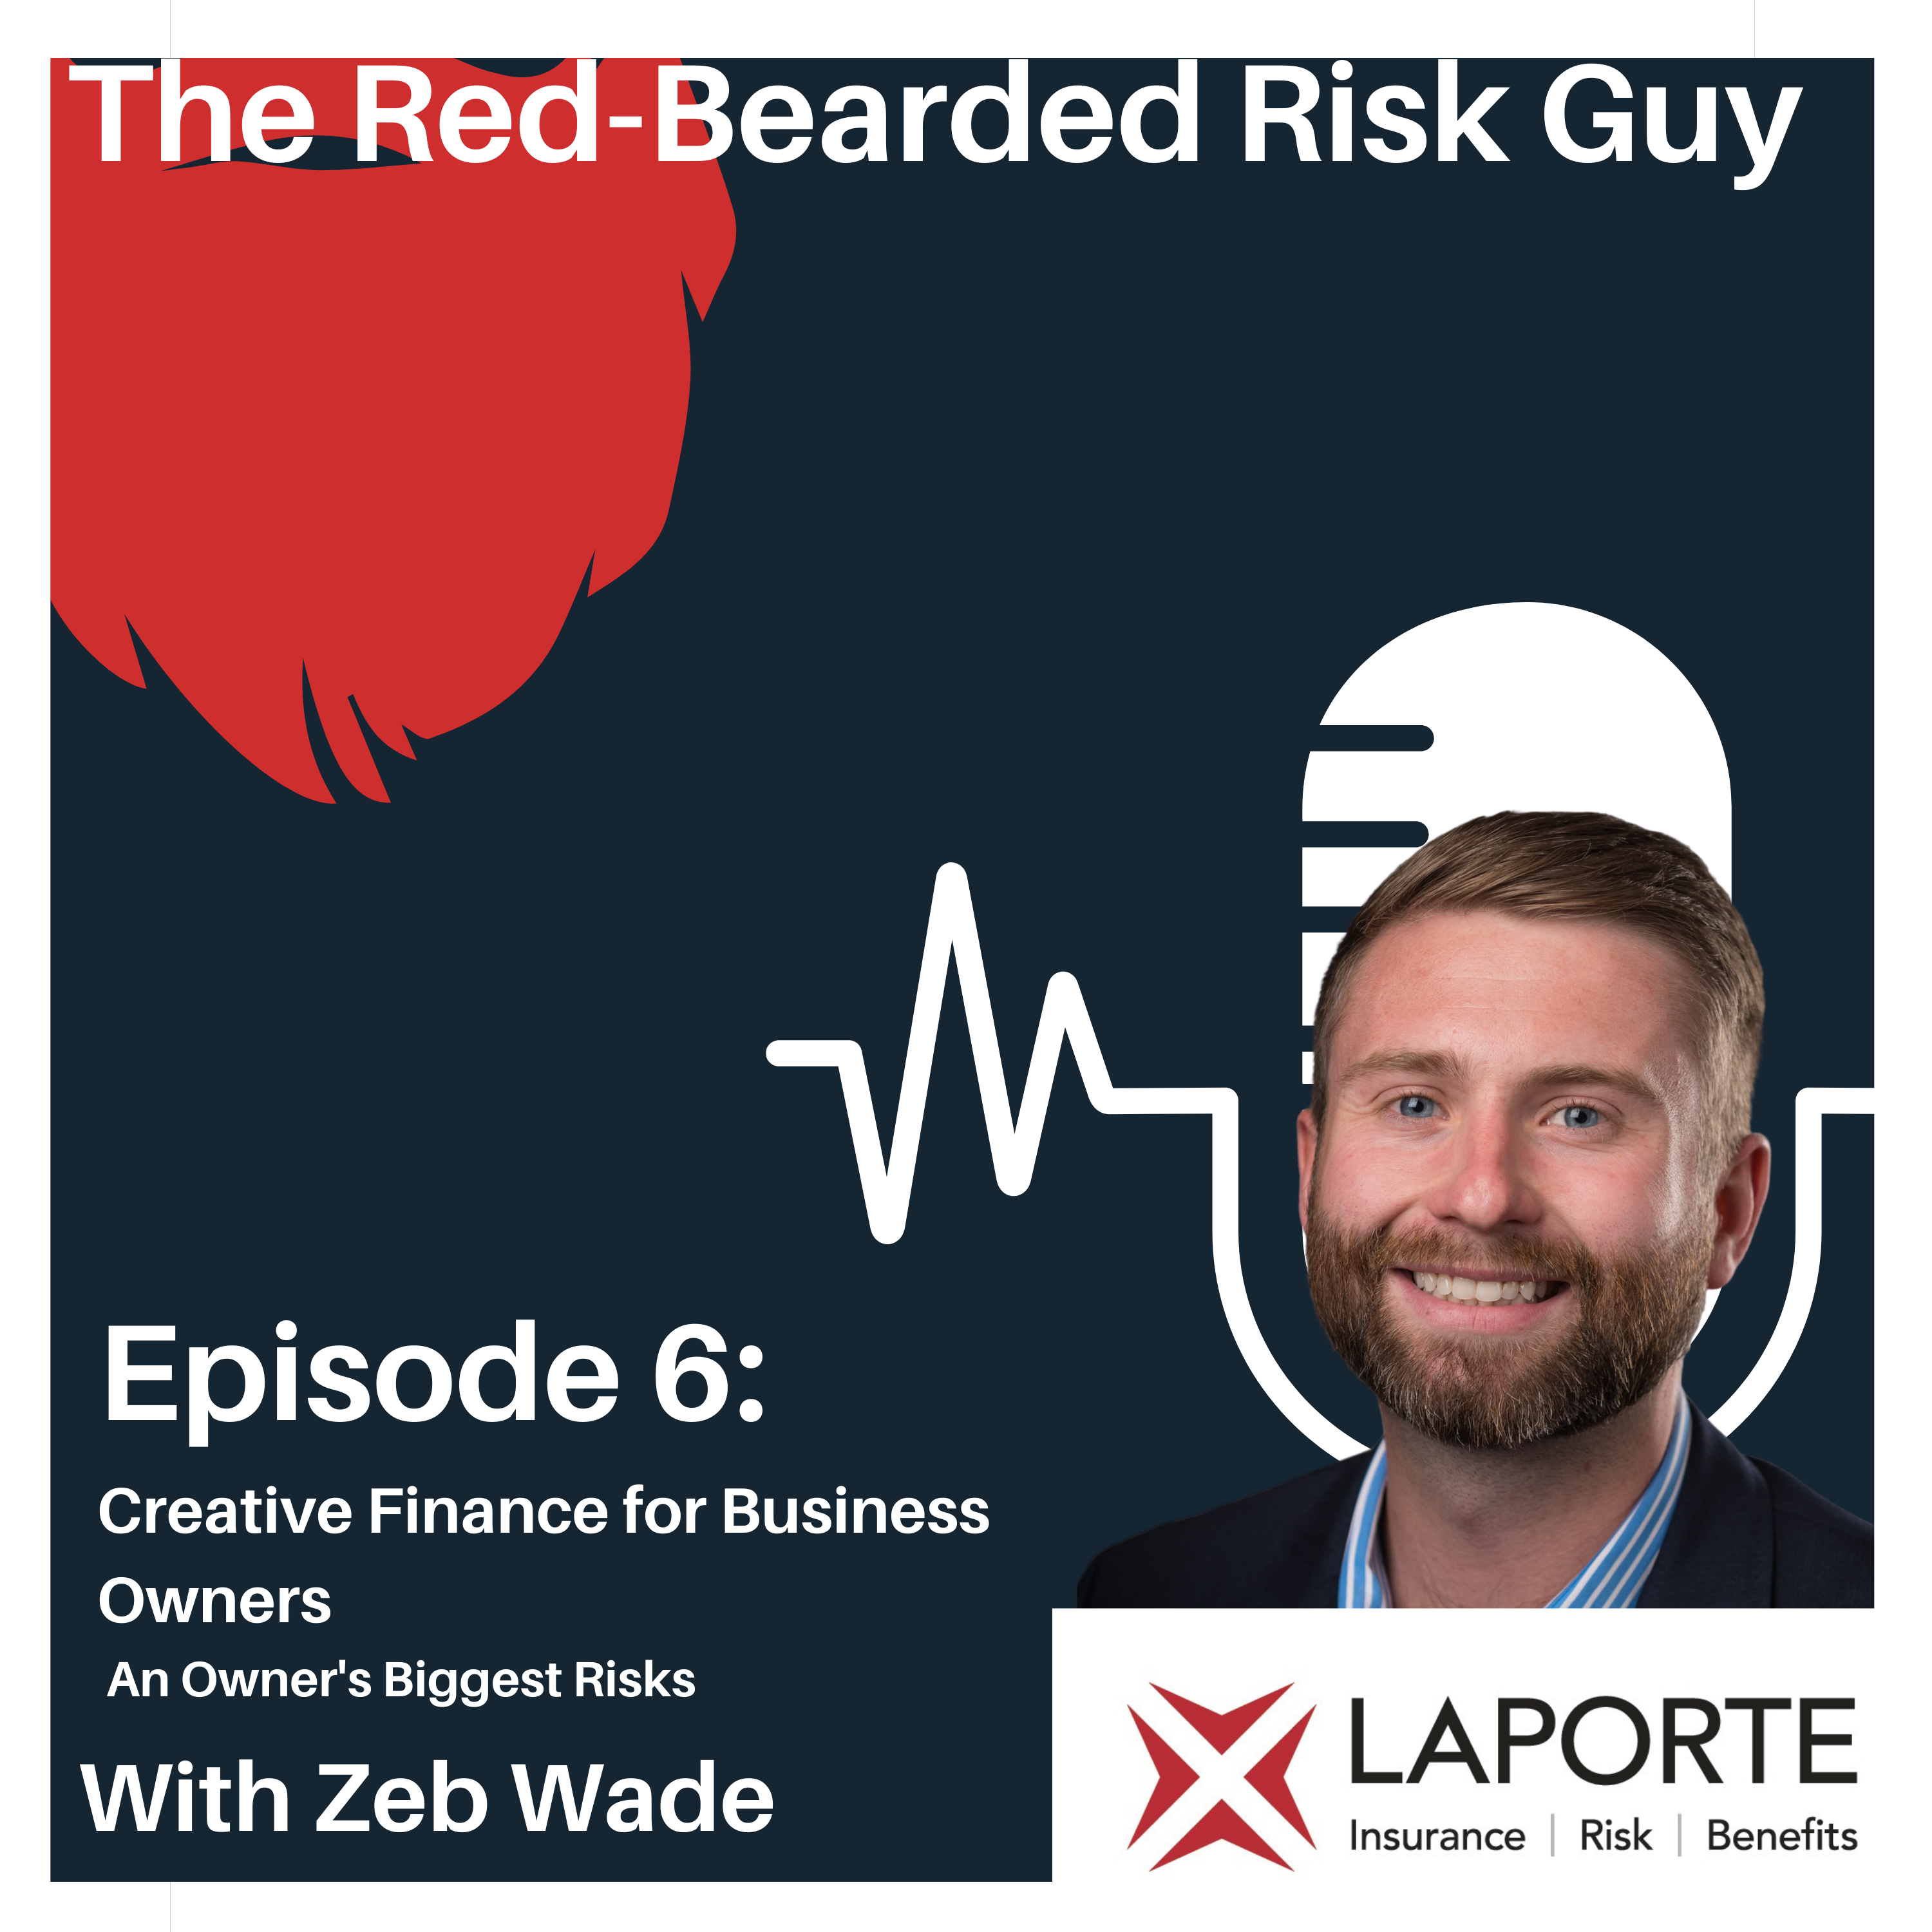 Cover Art for podcast episode from buzzsprout and spotify The Red-bearded Risk Guy Podcast headshot of Zeb in front of microphone icon. blue background. Partial Red Beard in background. Text on image: Episode 6: Creative Finance for Business Owners: An Owner's Biggest Risks w/ Zeb Wade